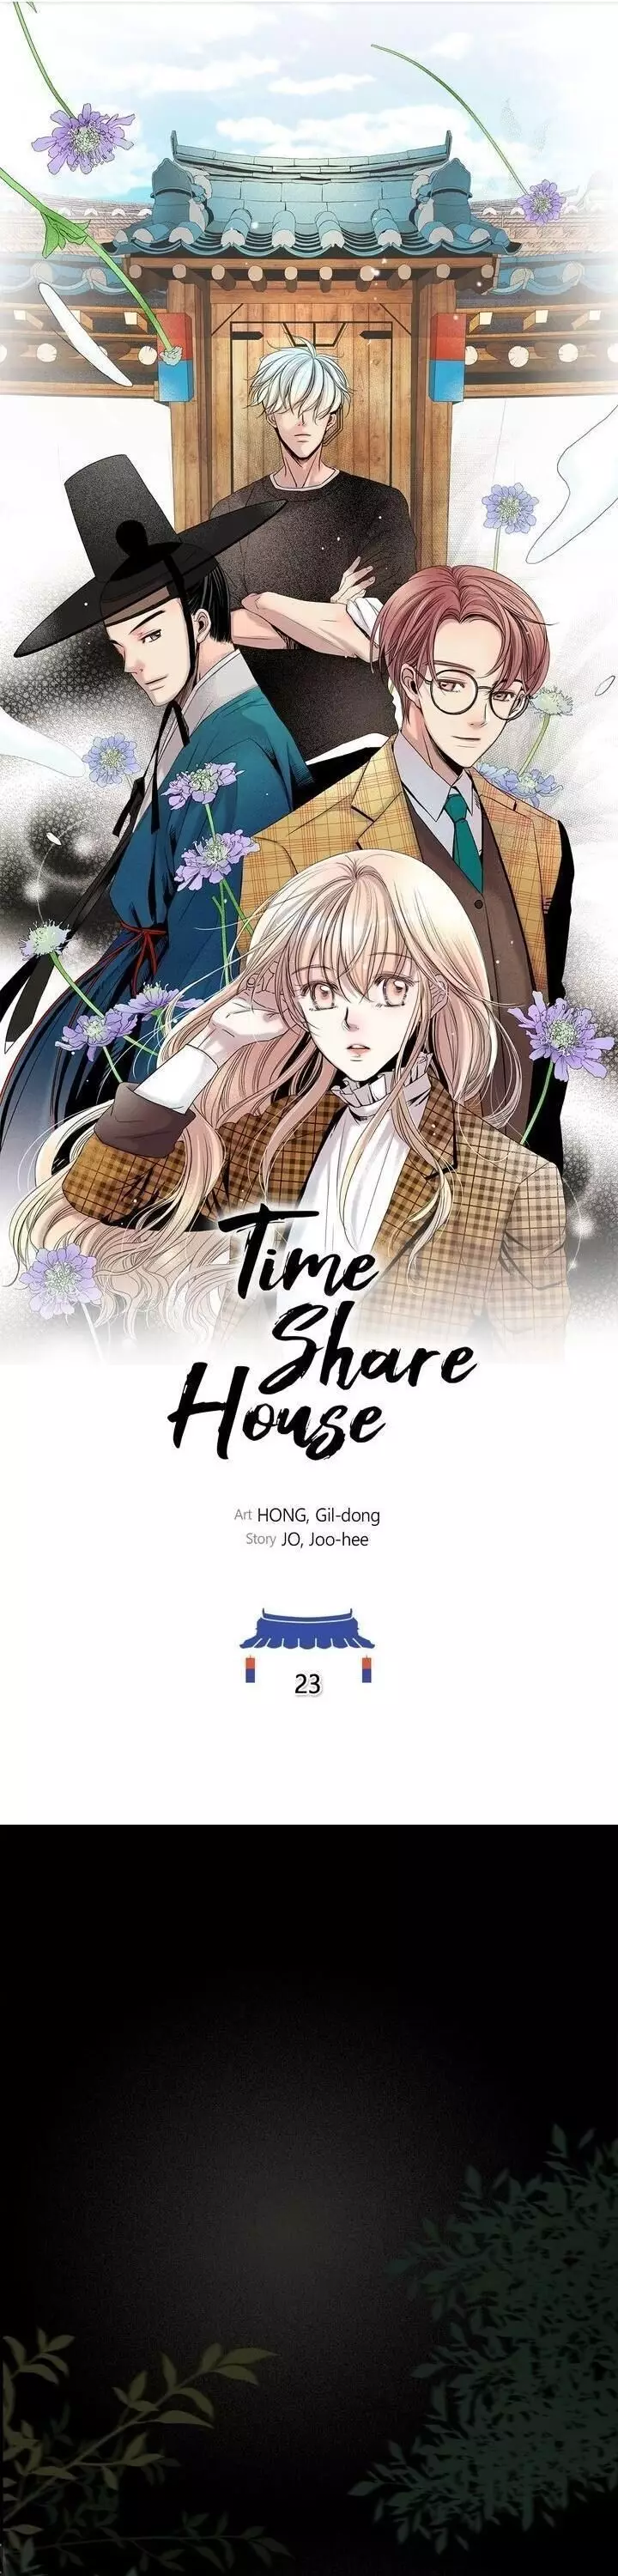 Time Share House - 23 page 1